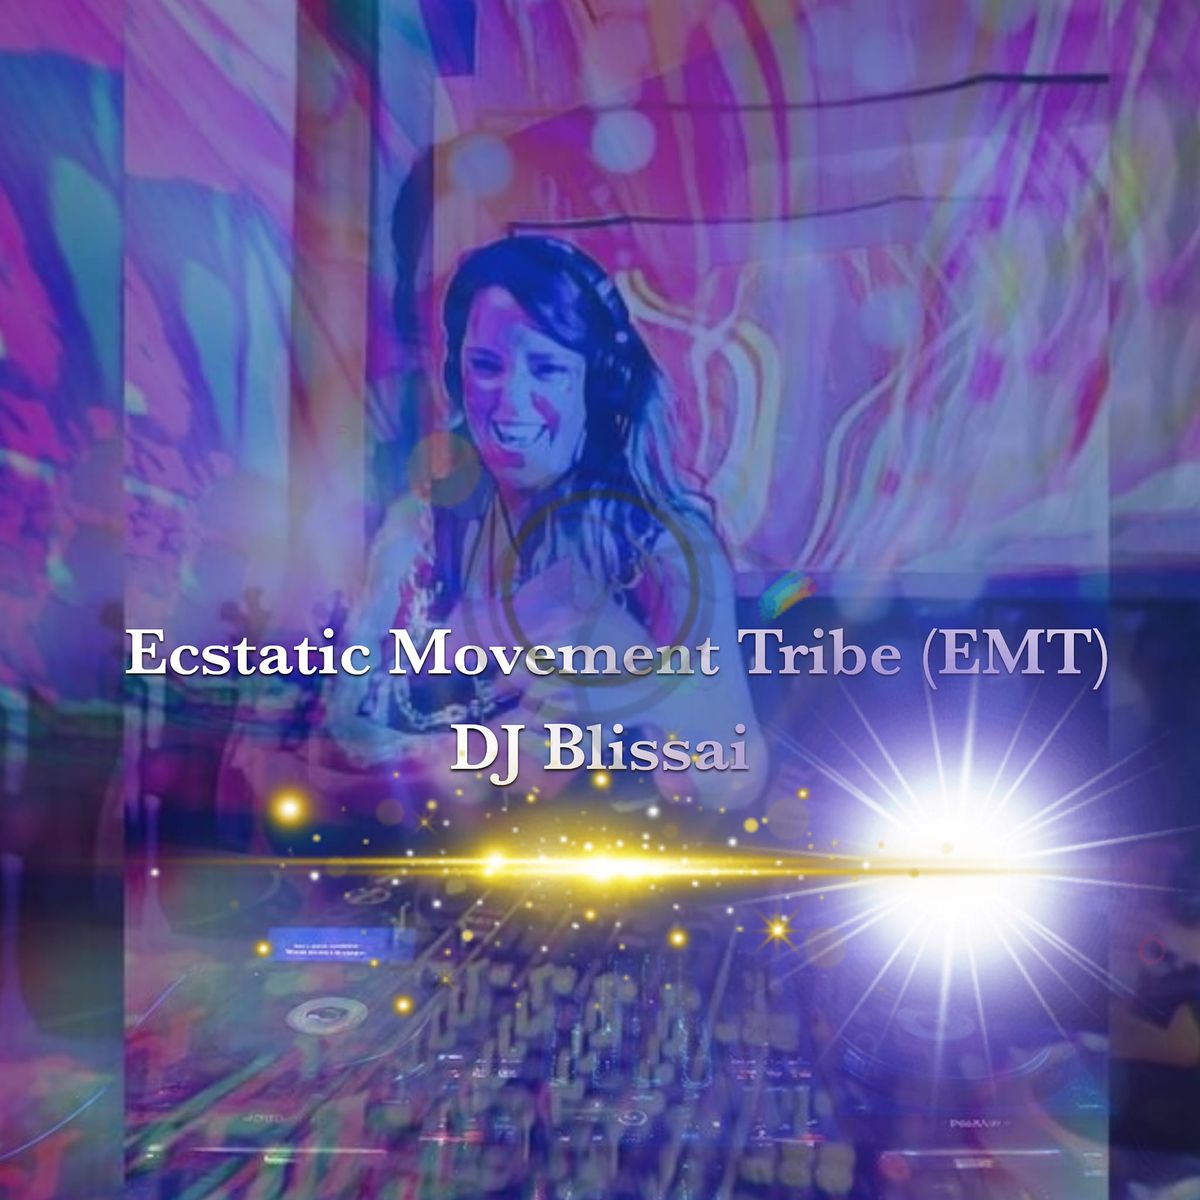 Boulder Ecstatic Movement Tribe with DJ Blissai 